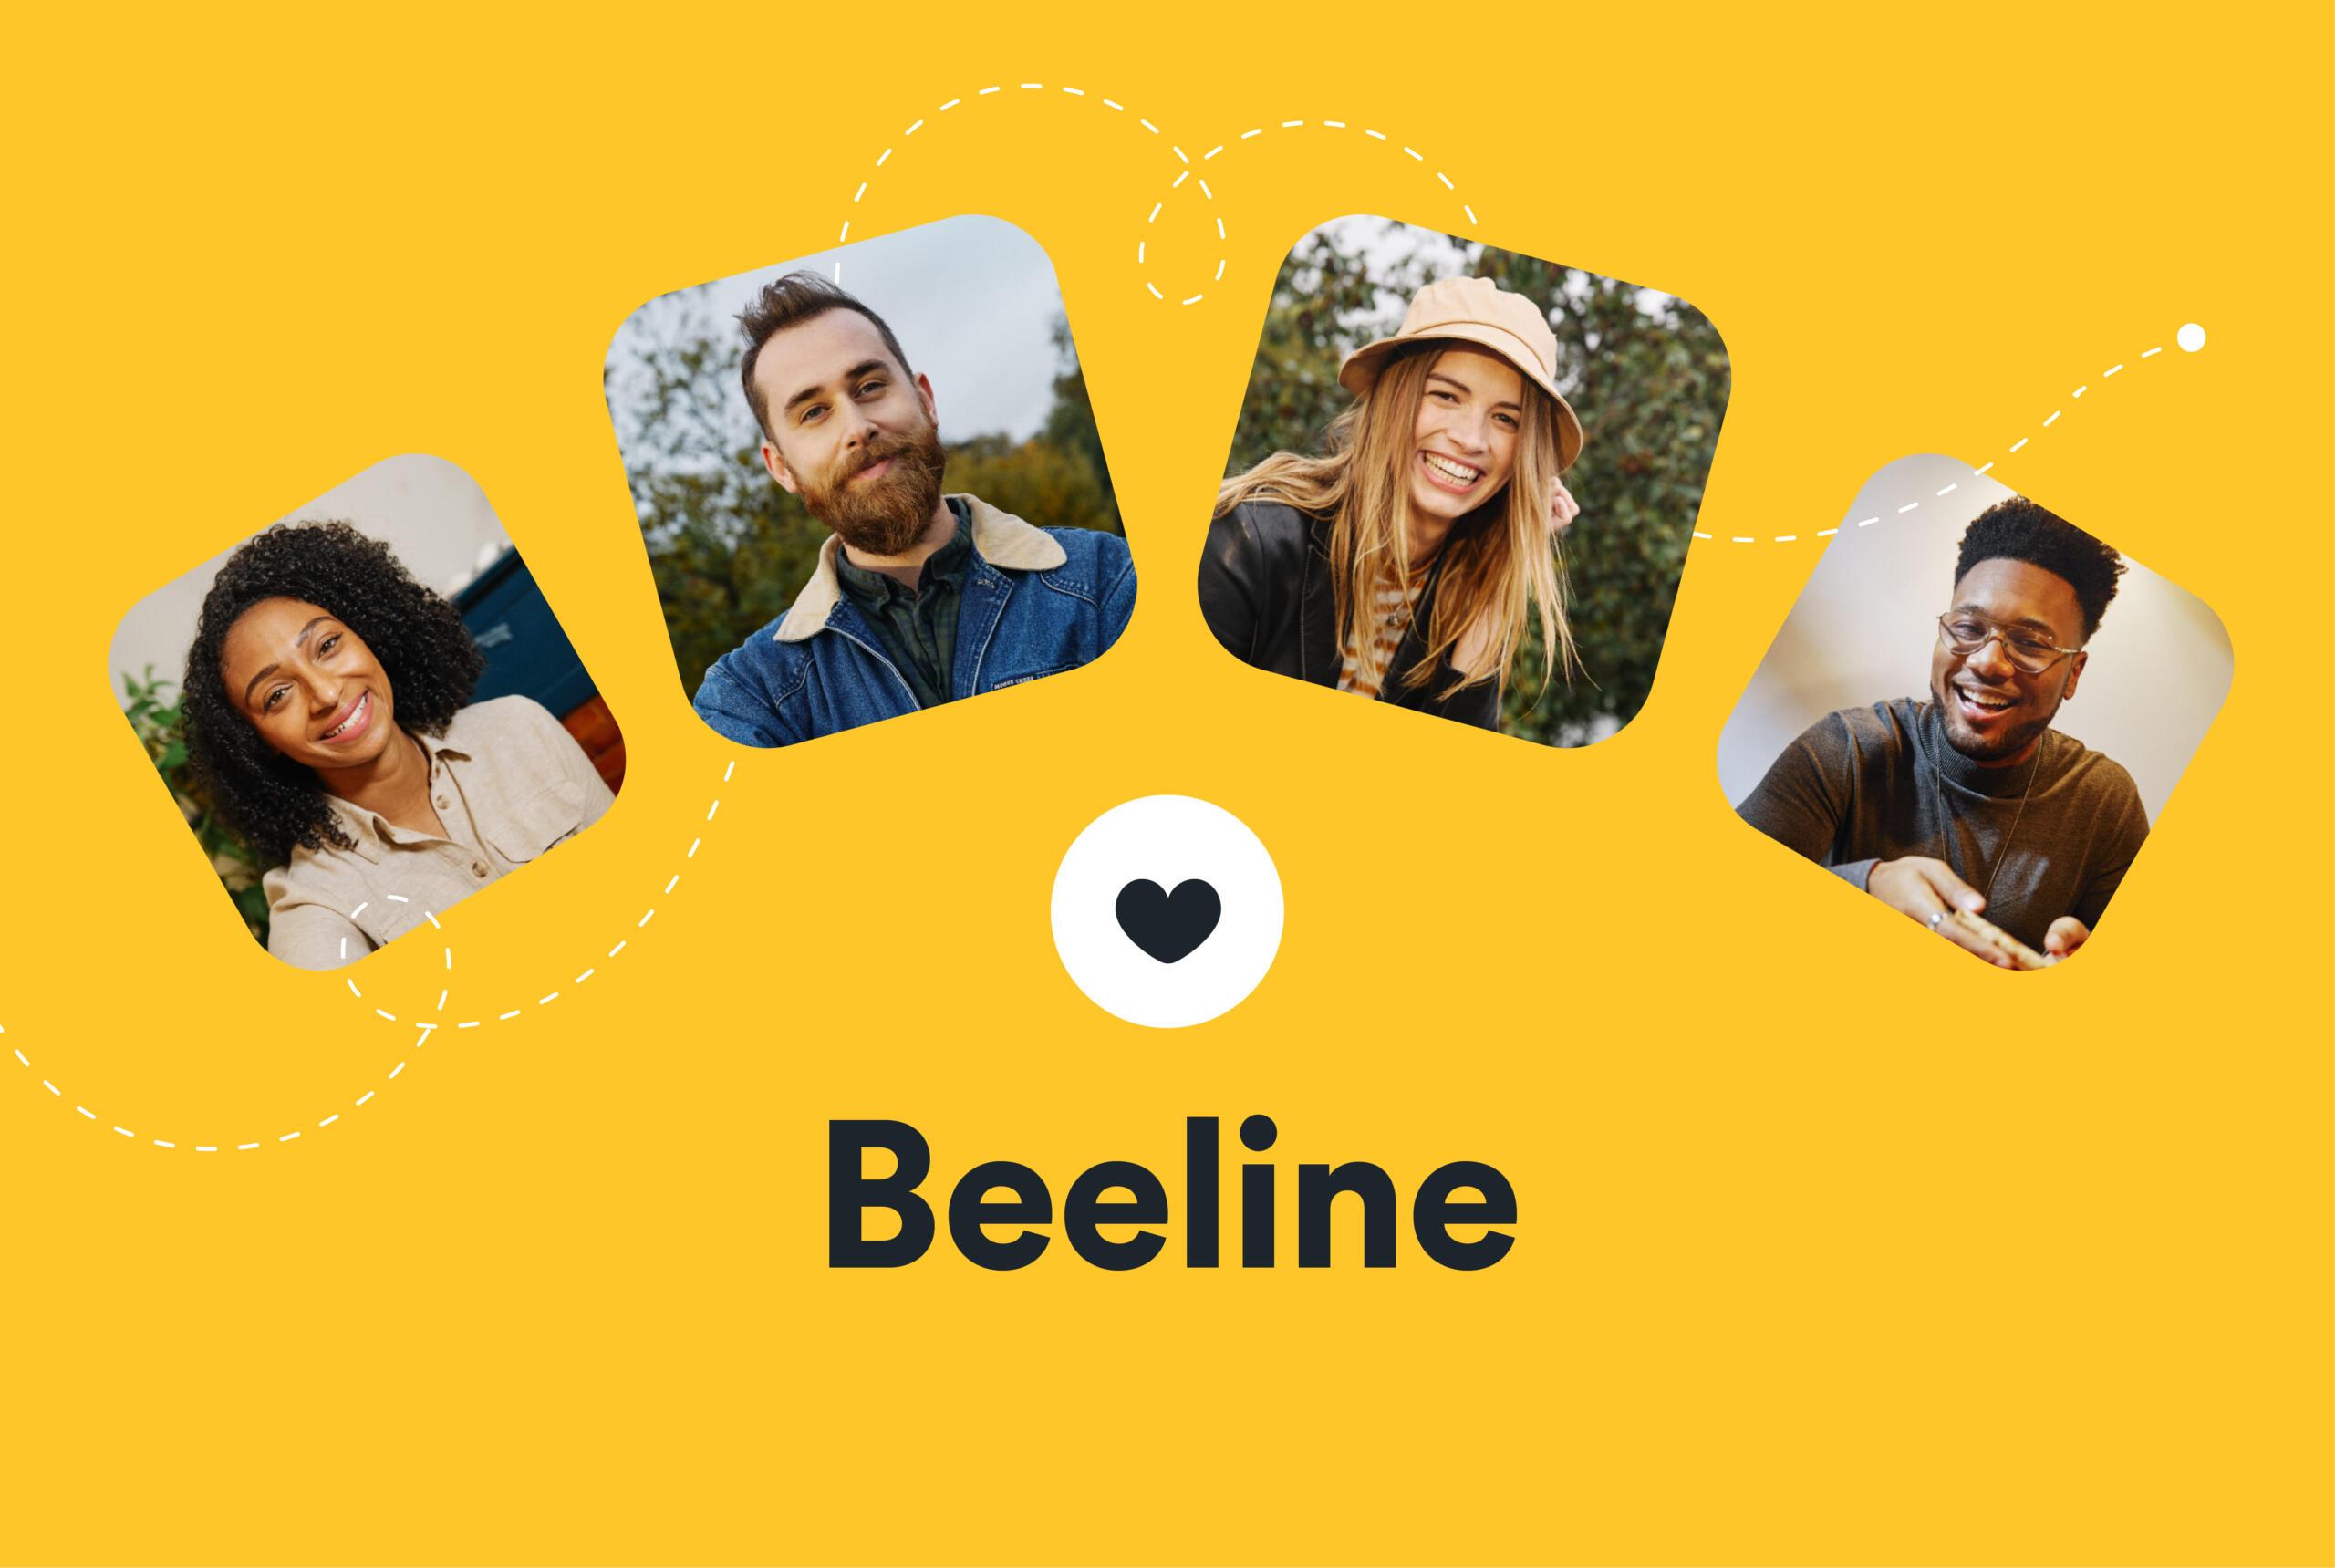 What Are the Benefits of Bumble Beeline?